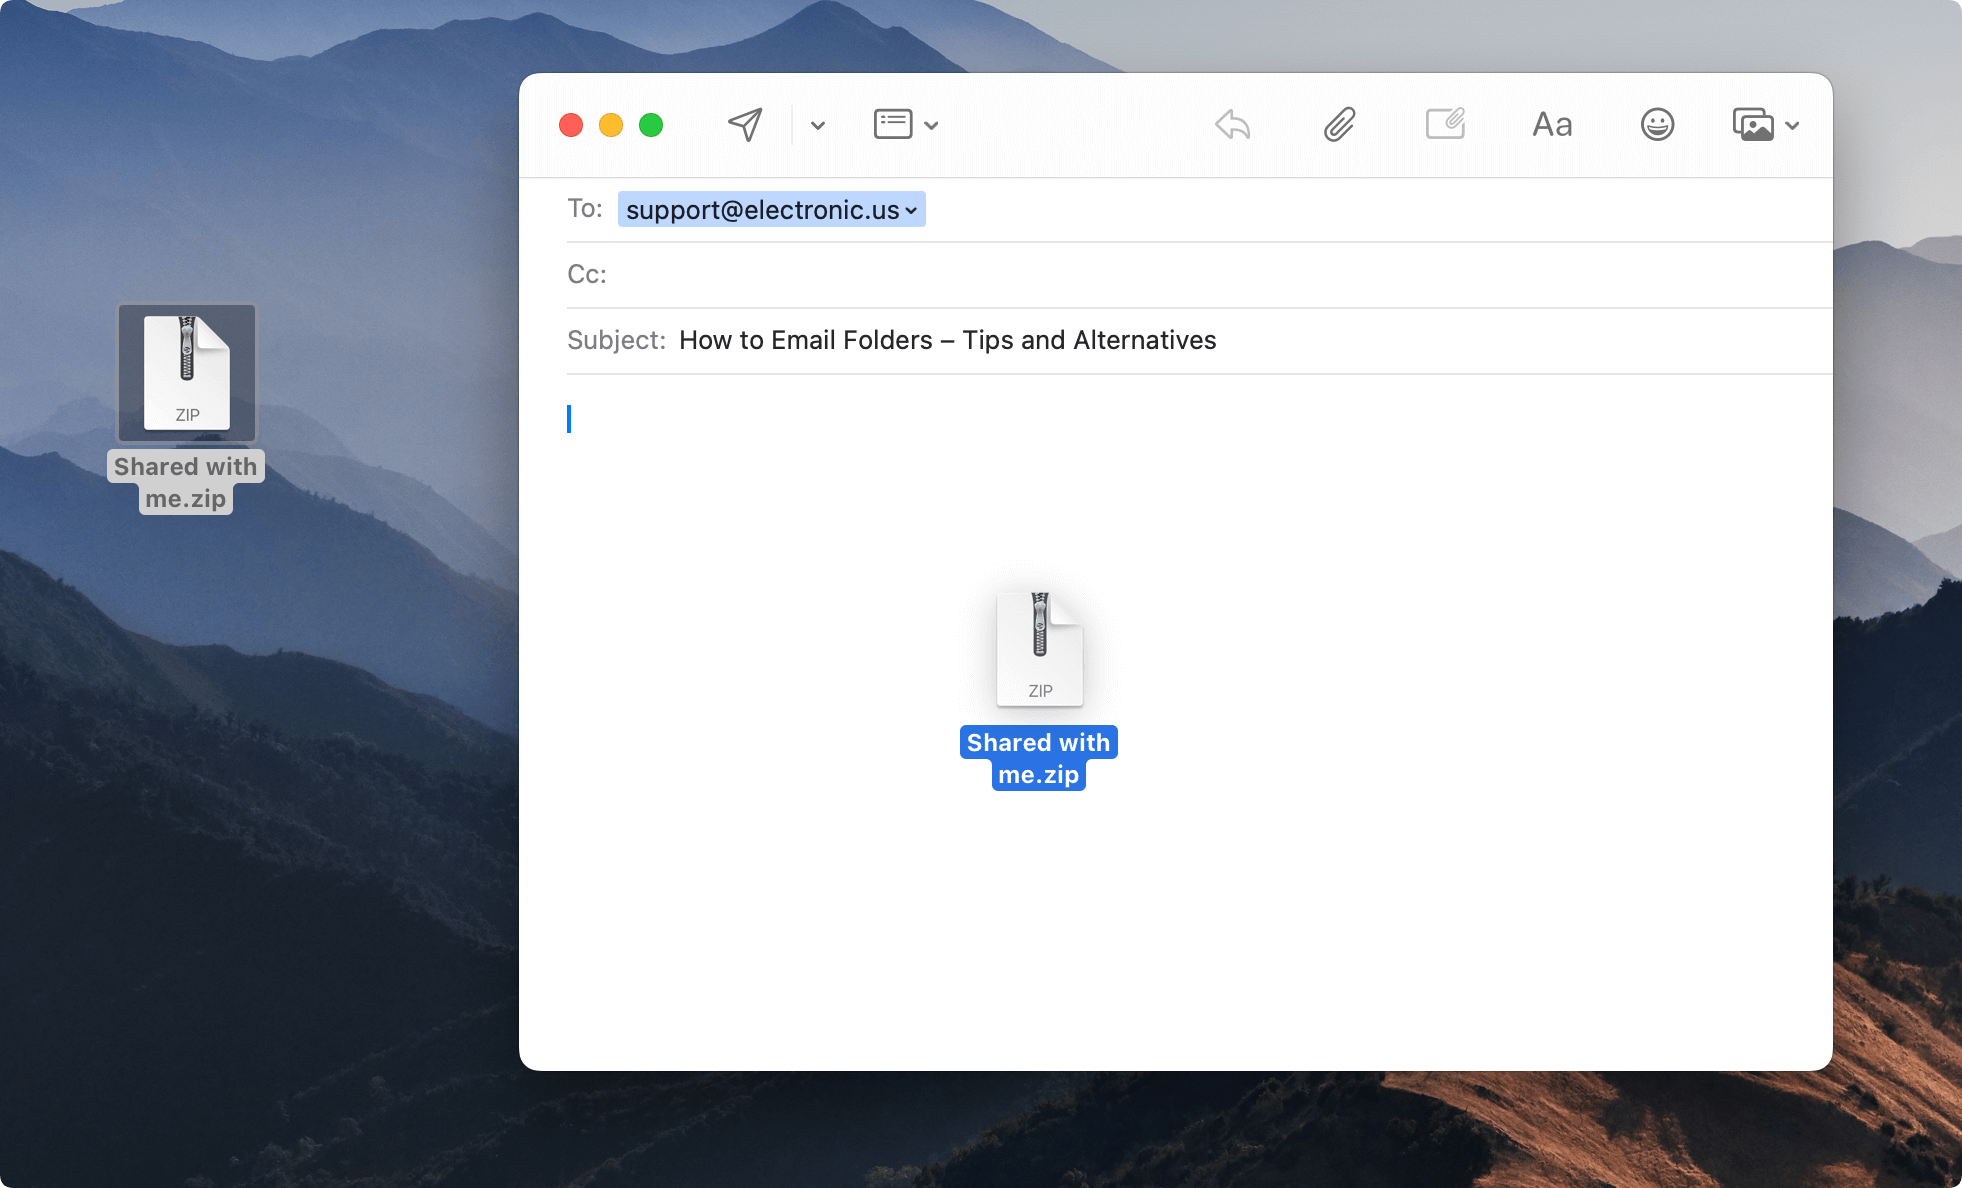 The compressed folder is added as an attachment to an email.